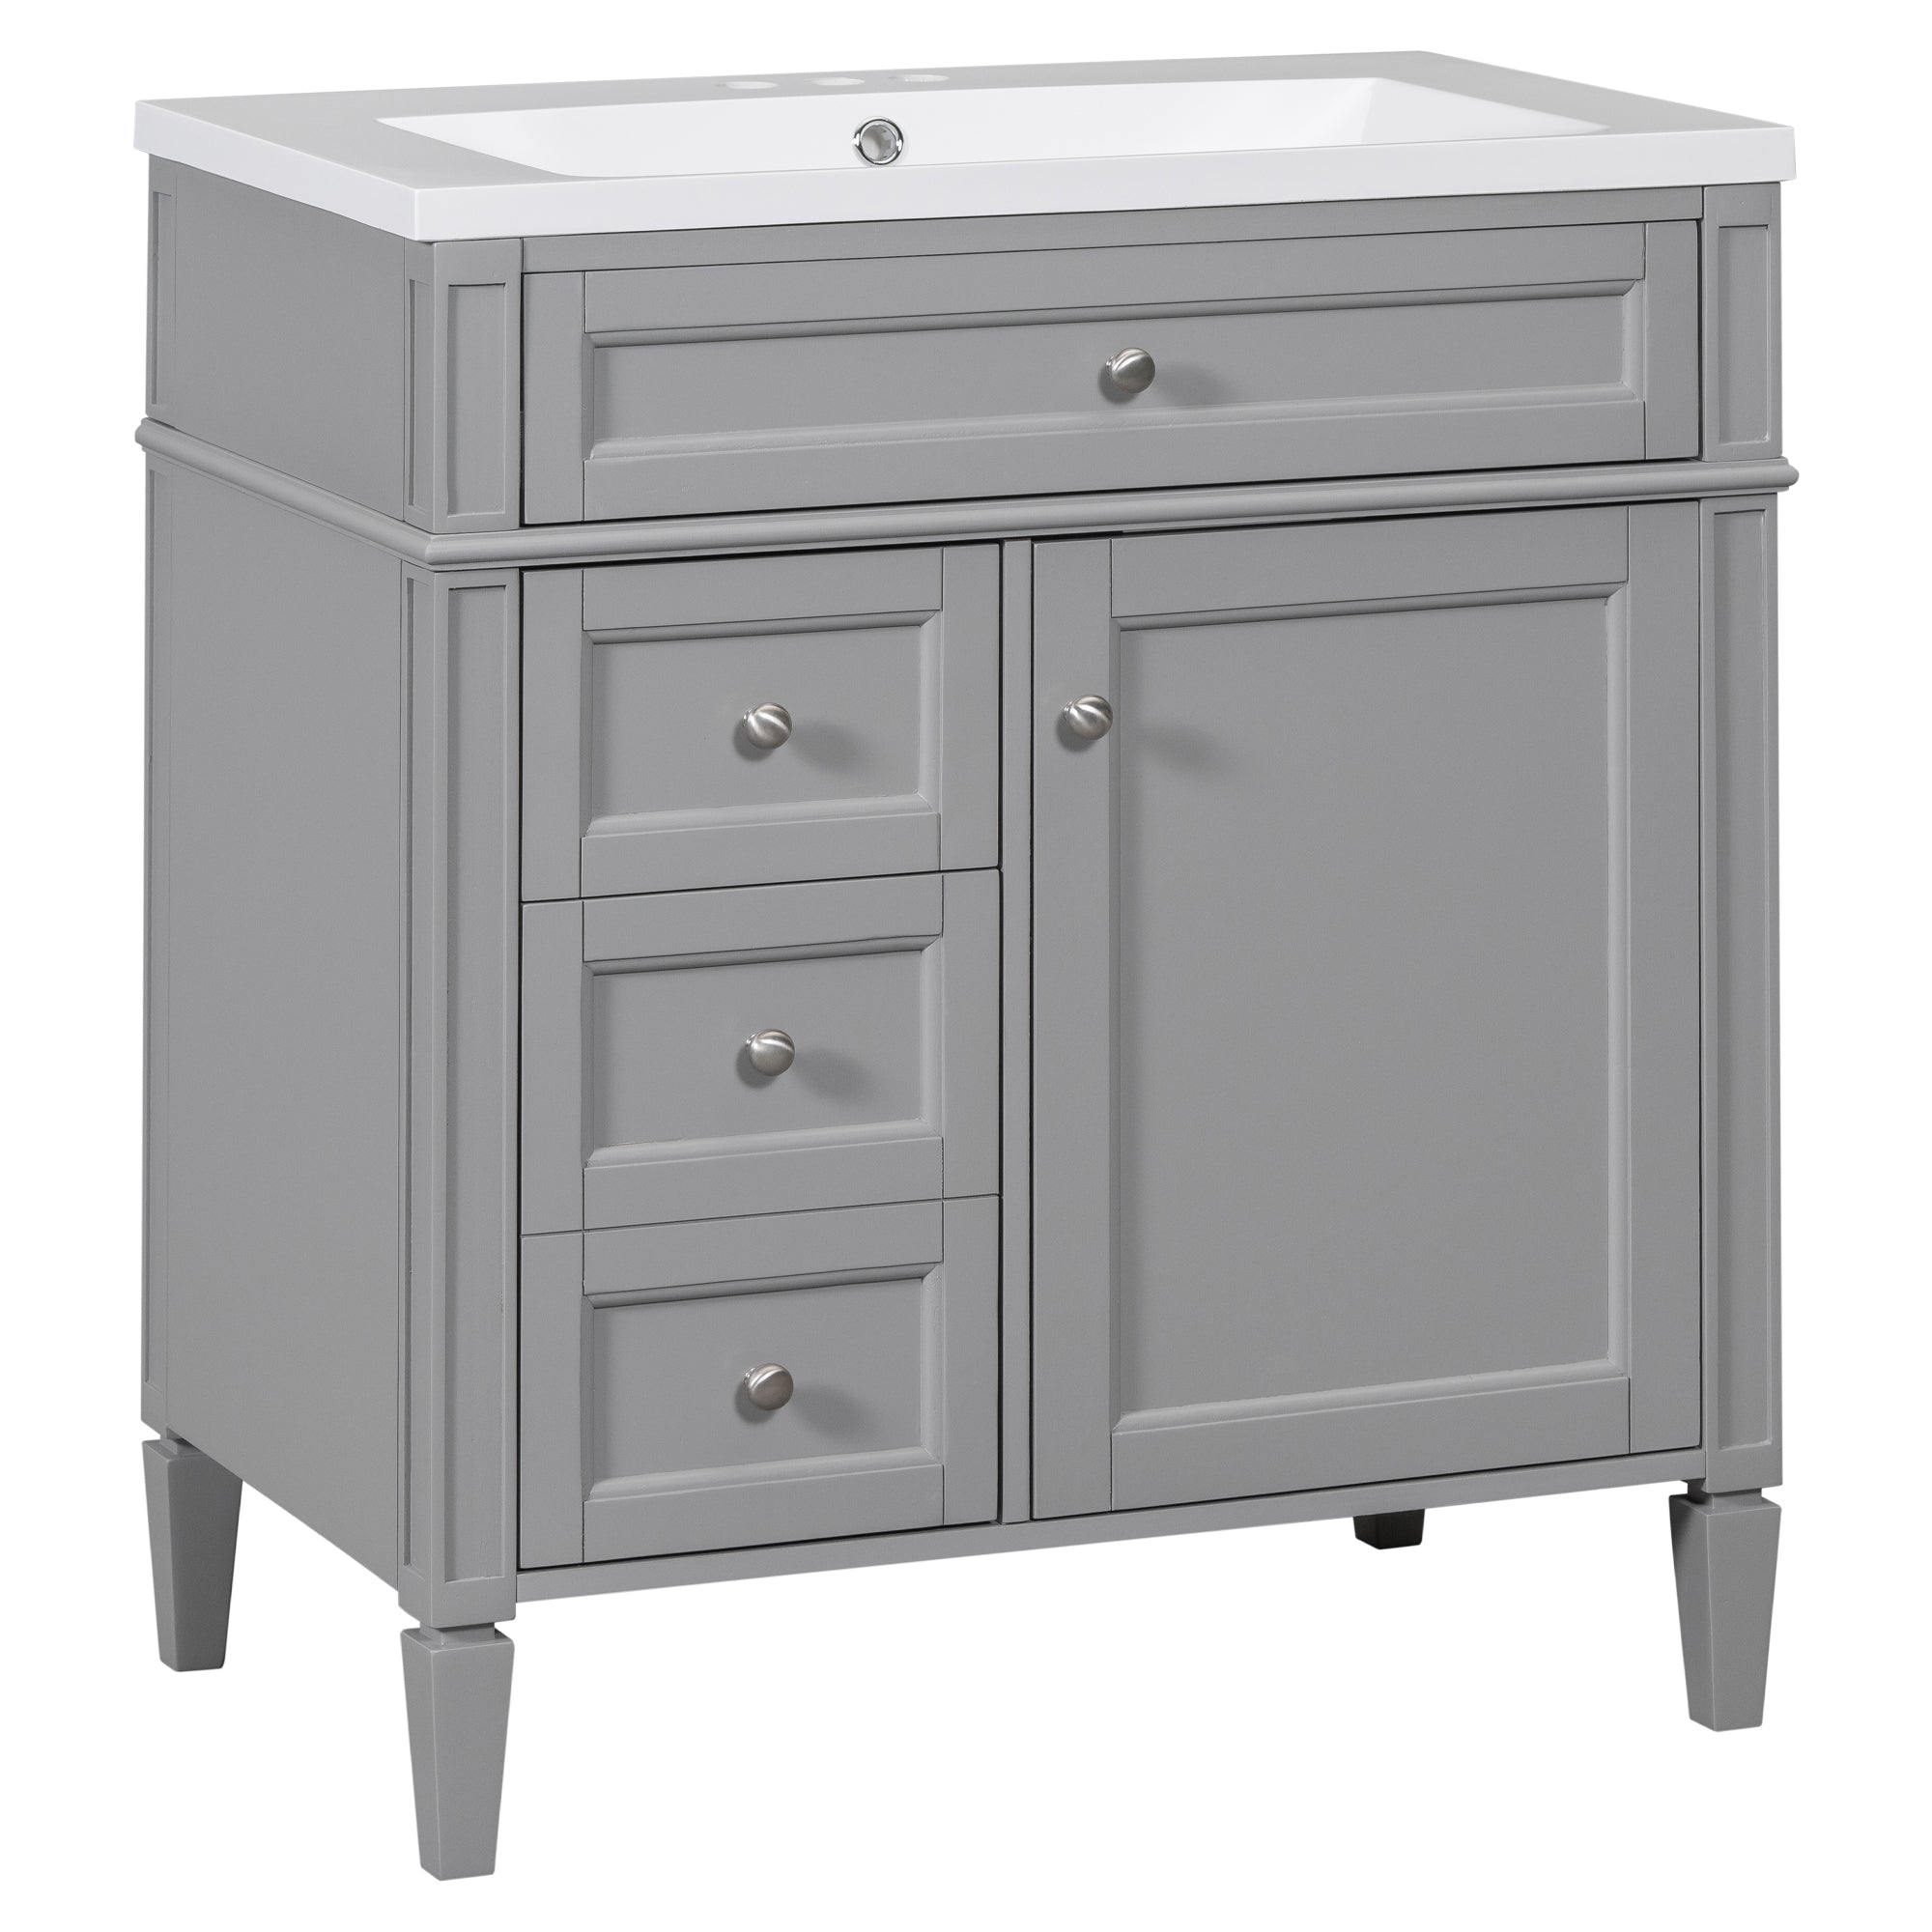 30'' Bathroom Vanity with Top Sink, Modern Bathroom Storage Cabinet with 2 Drawers and a Tip-out Drawer